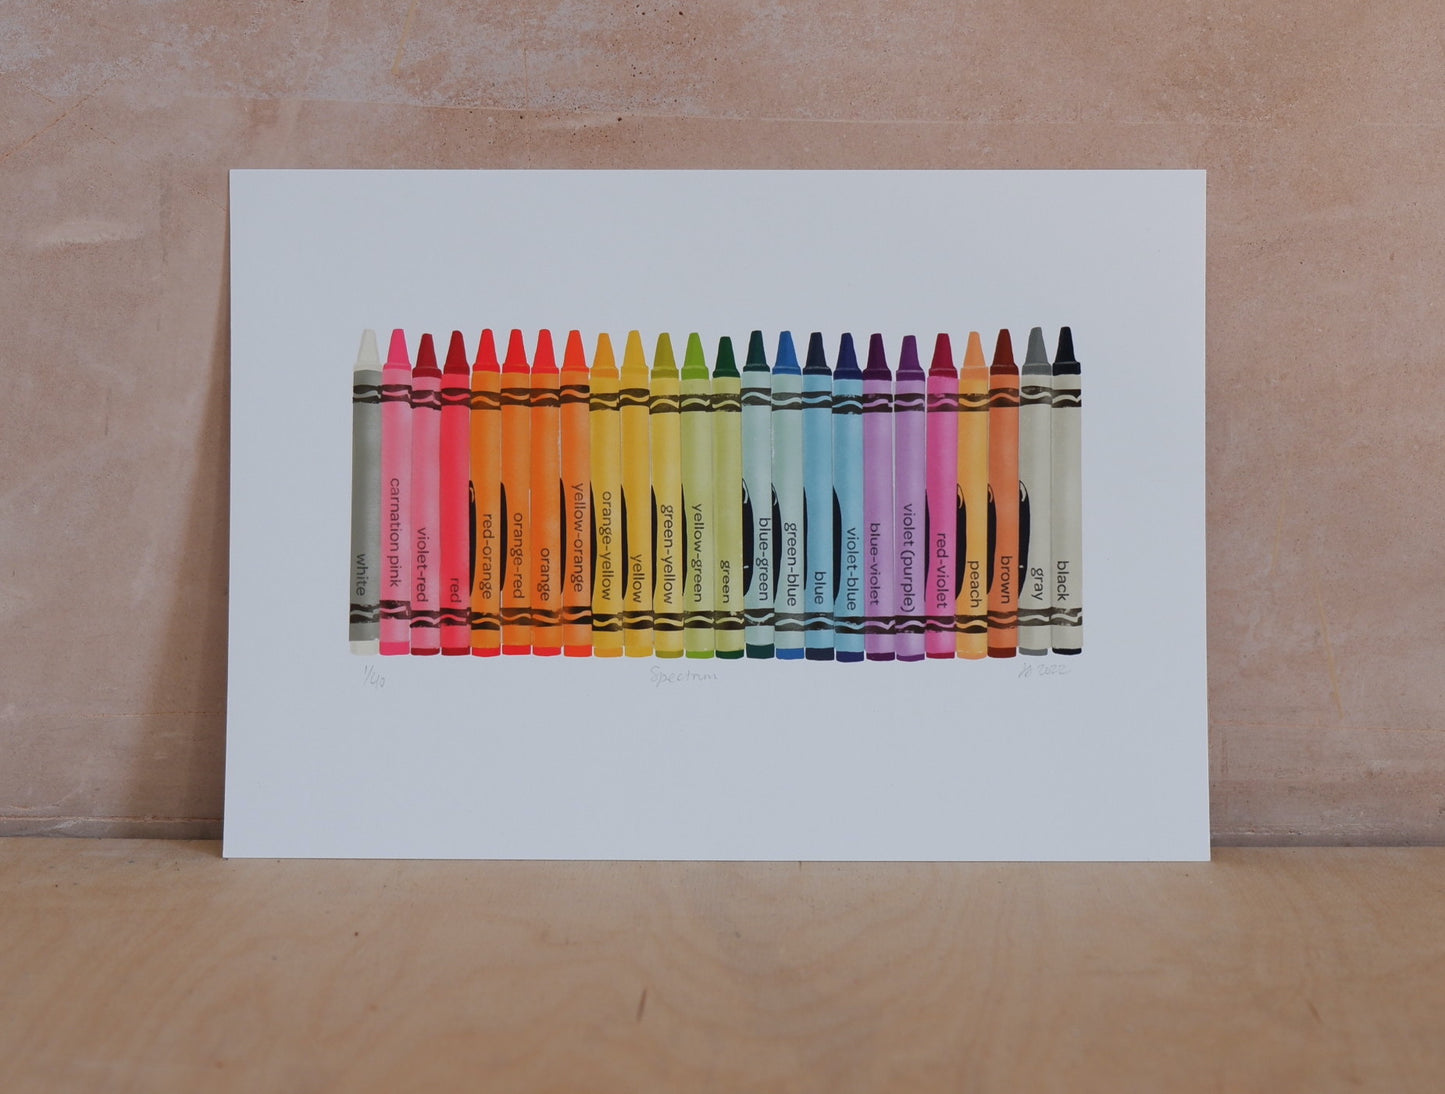 Spectrum limited edition giclee art print